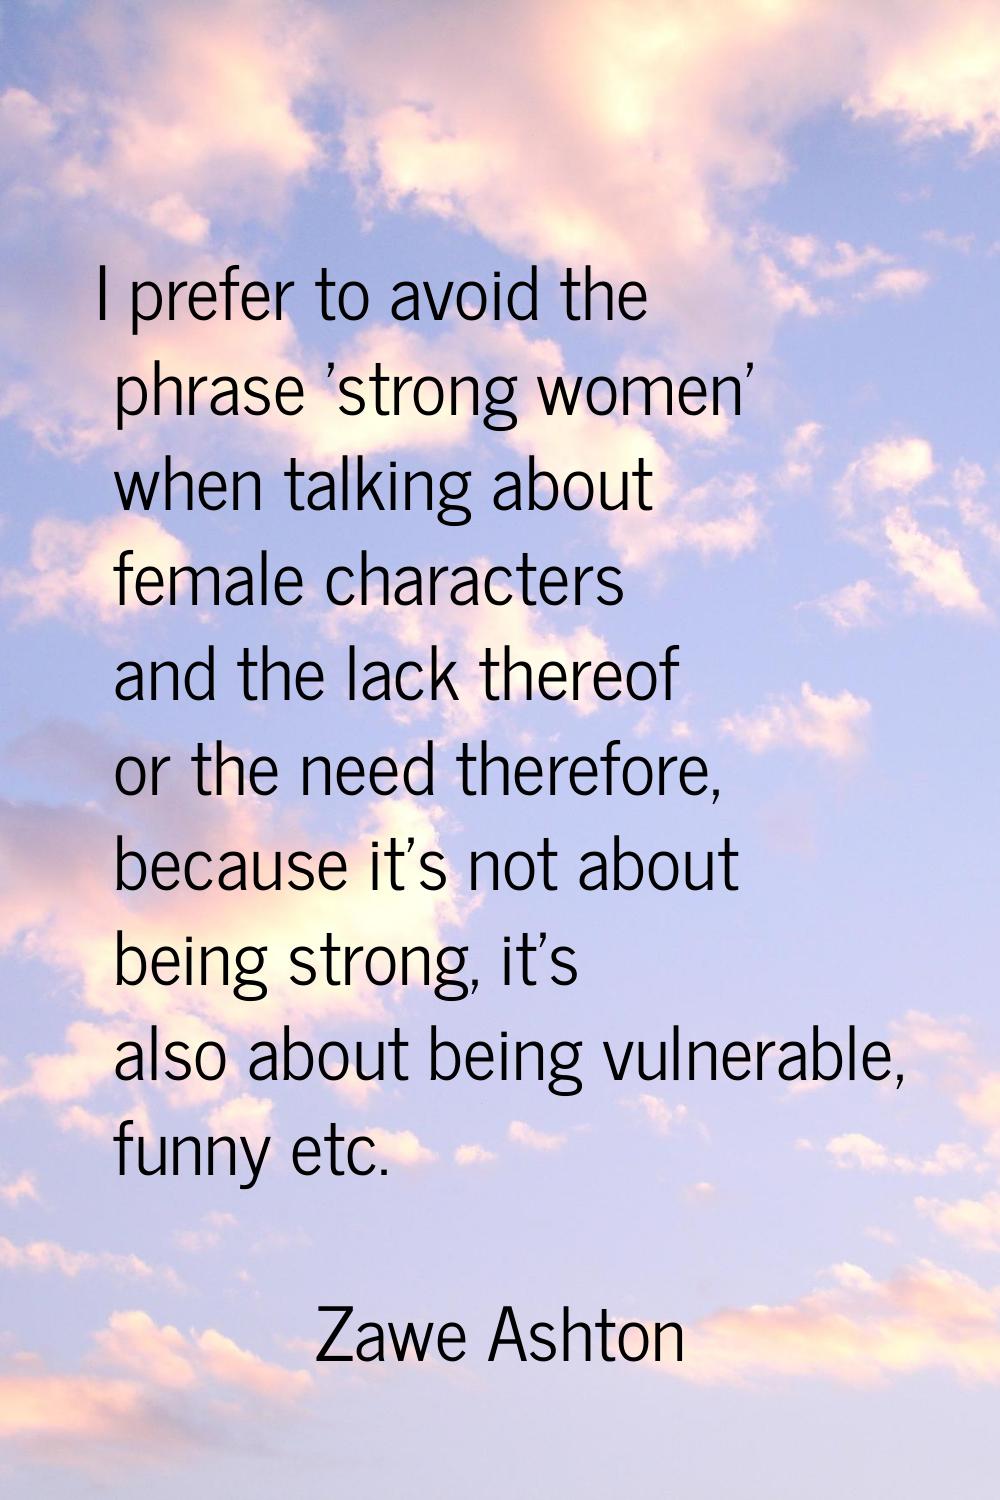 I prefer to avoid the phrase 'strong women' when talking about female characters and the lack there